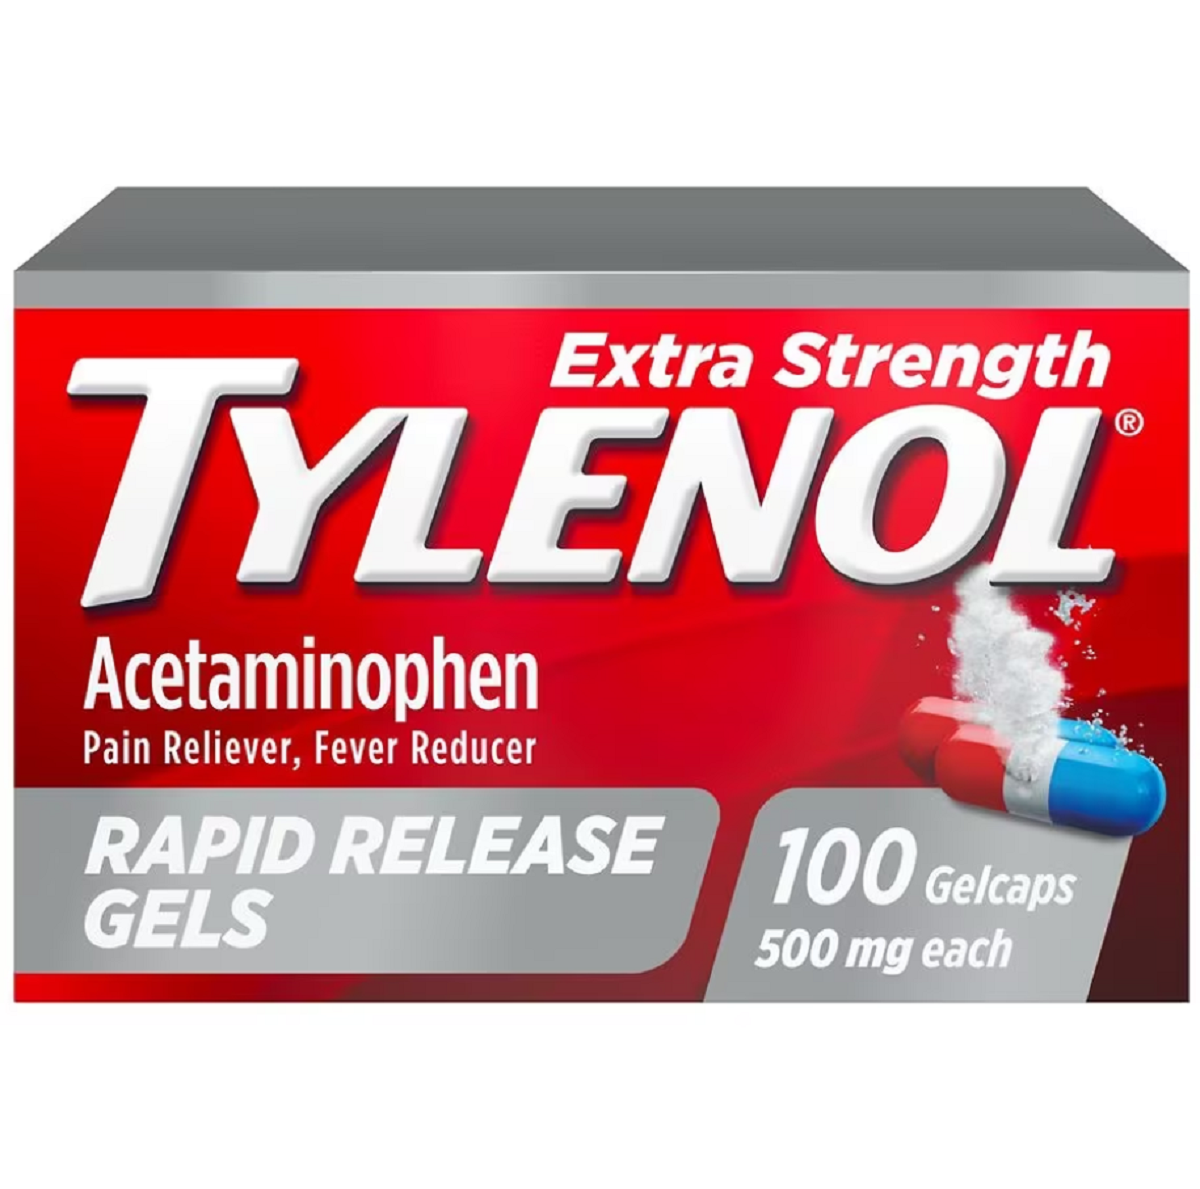 $2 Off Any (1) Tylenol Printable Coupon